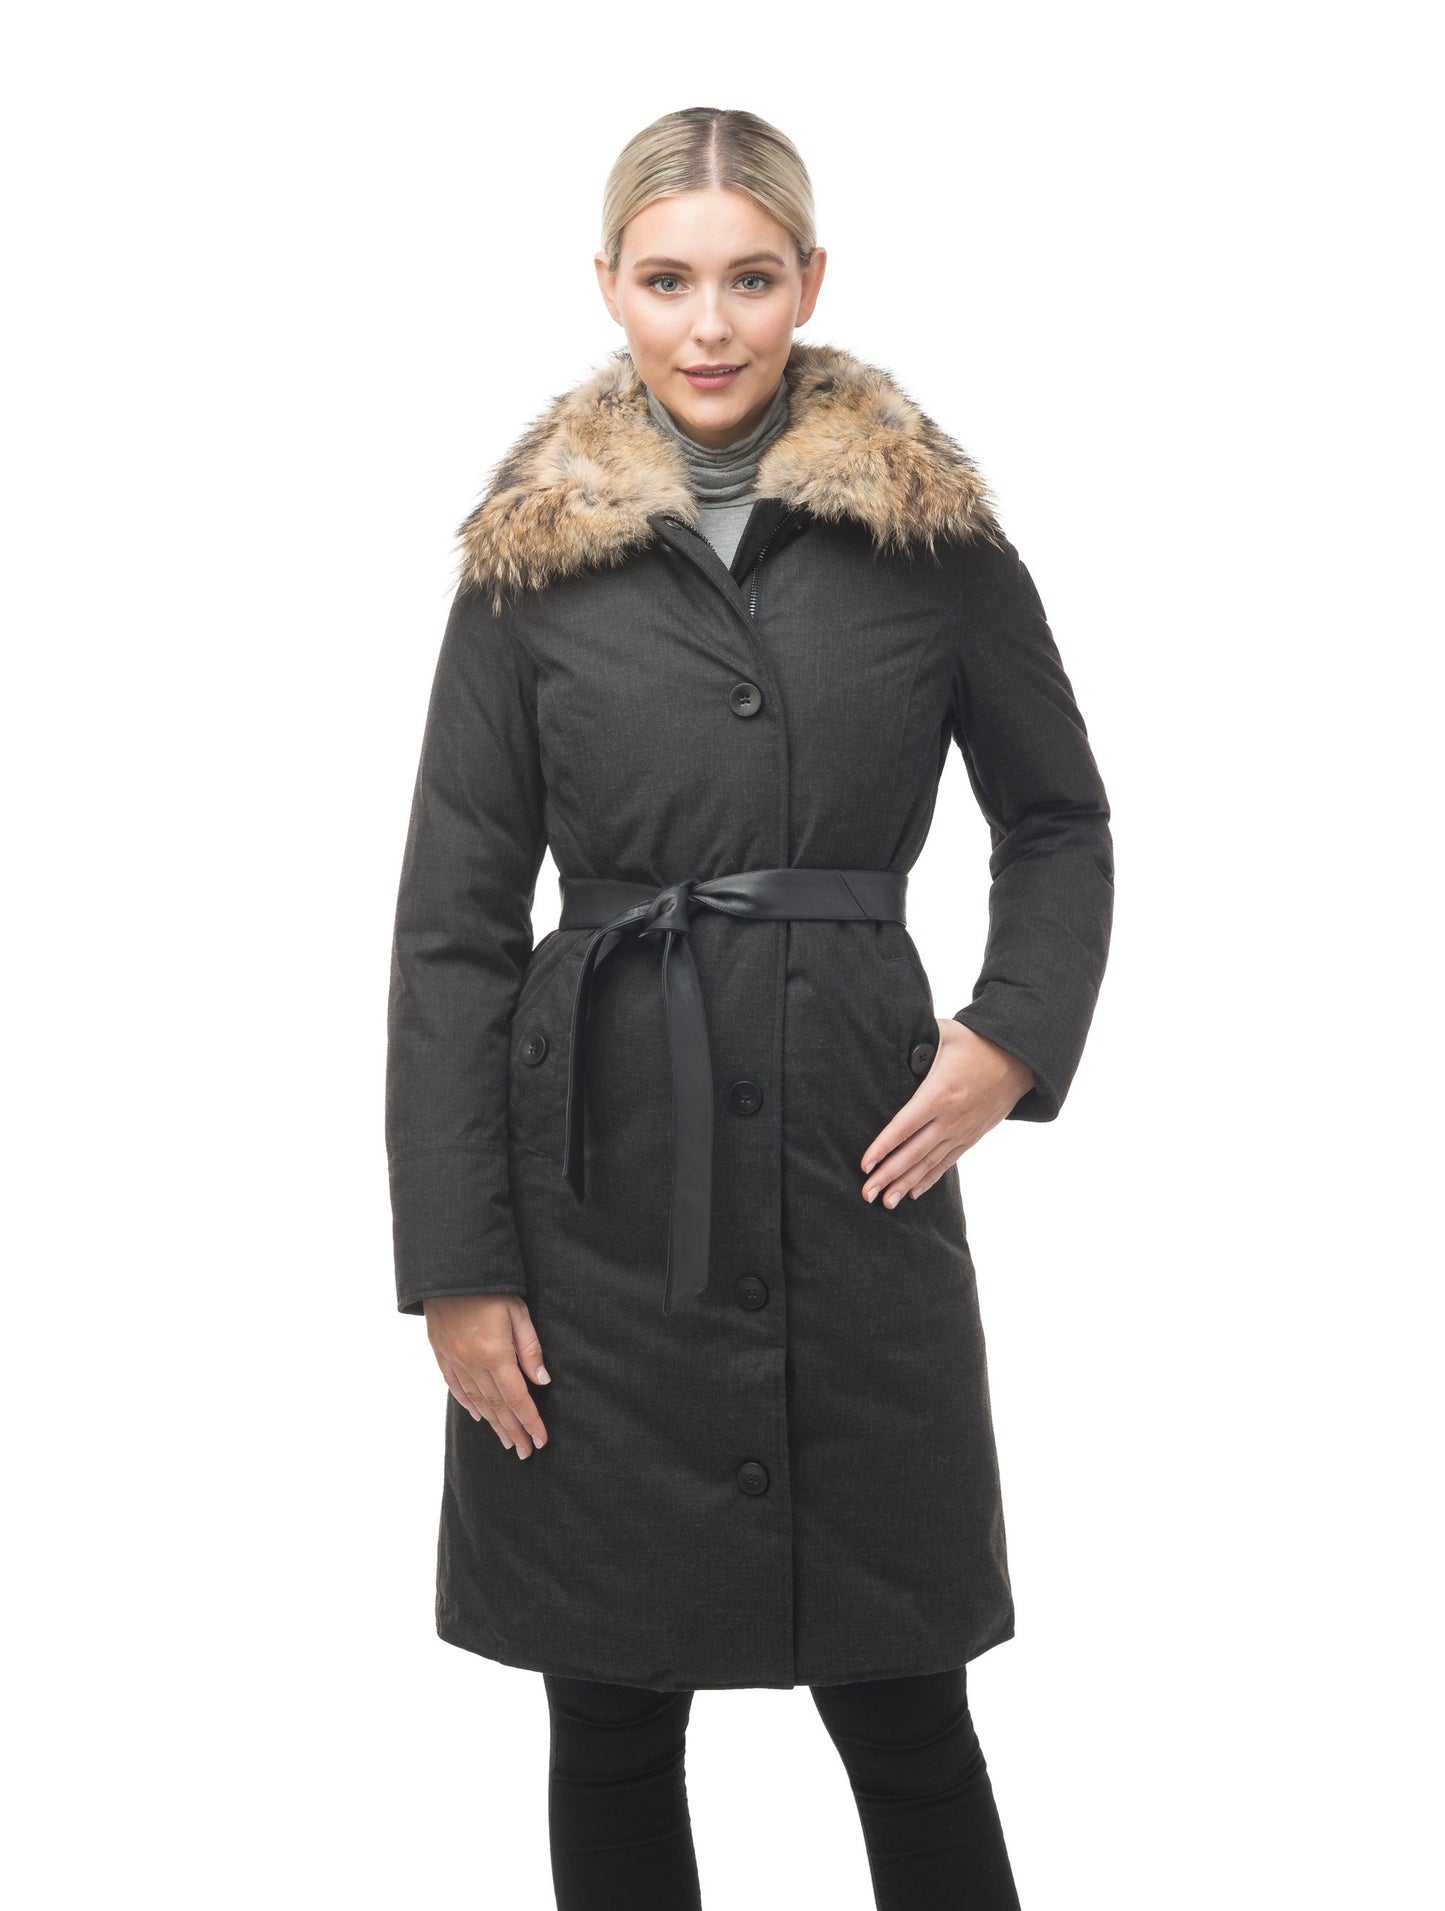 Women's lightweight down filled parka with a removable fur collar and a washable, Japanese DWR Leather belt in H. Charcoal